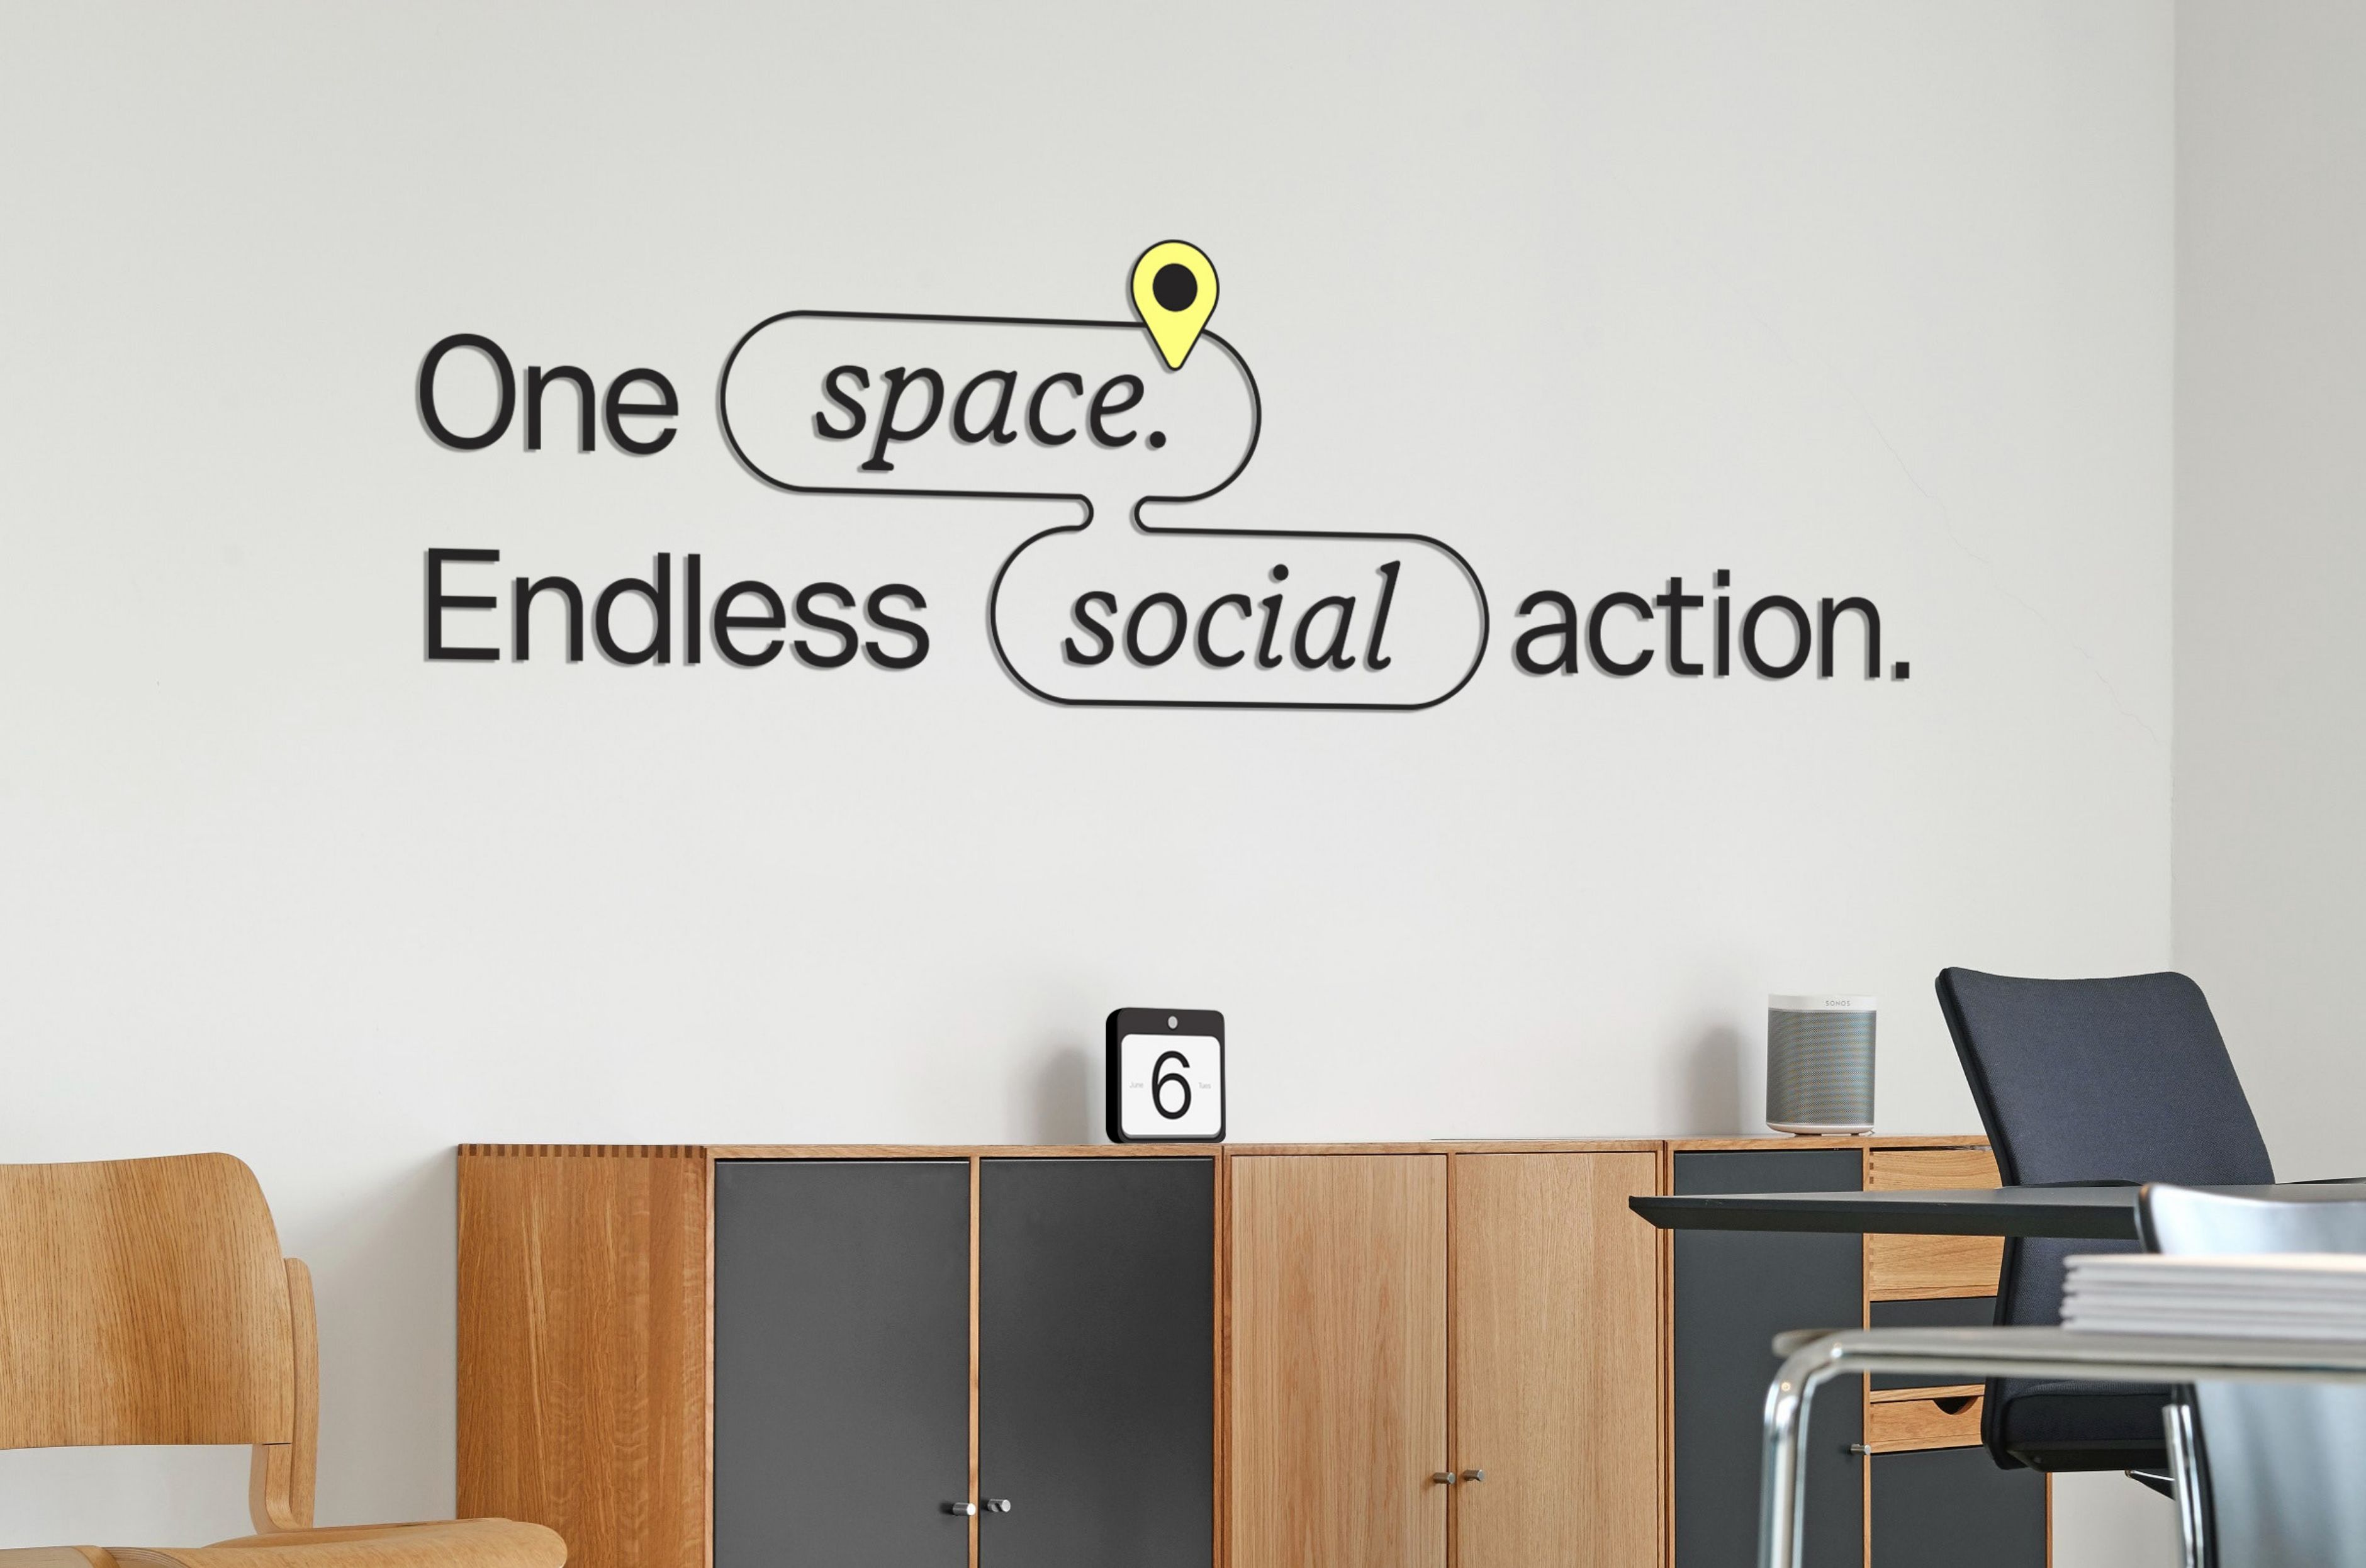 Office signage reading "One space. Endless social action."